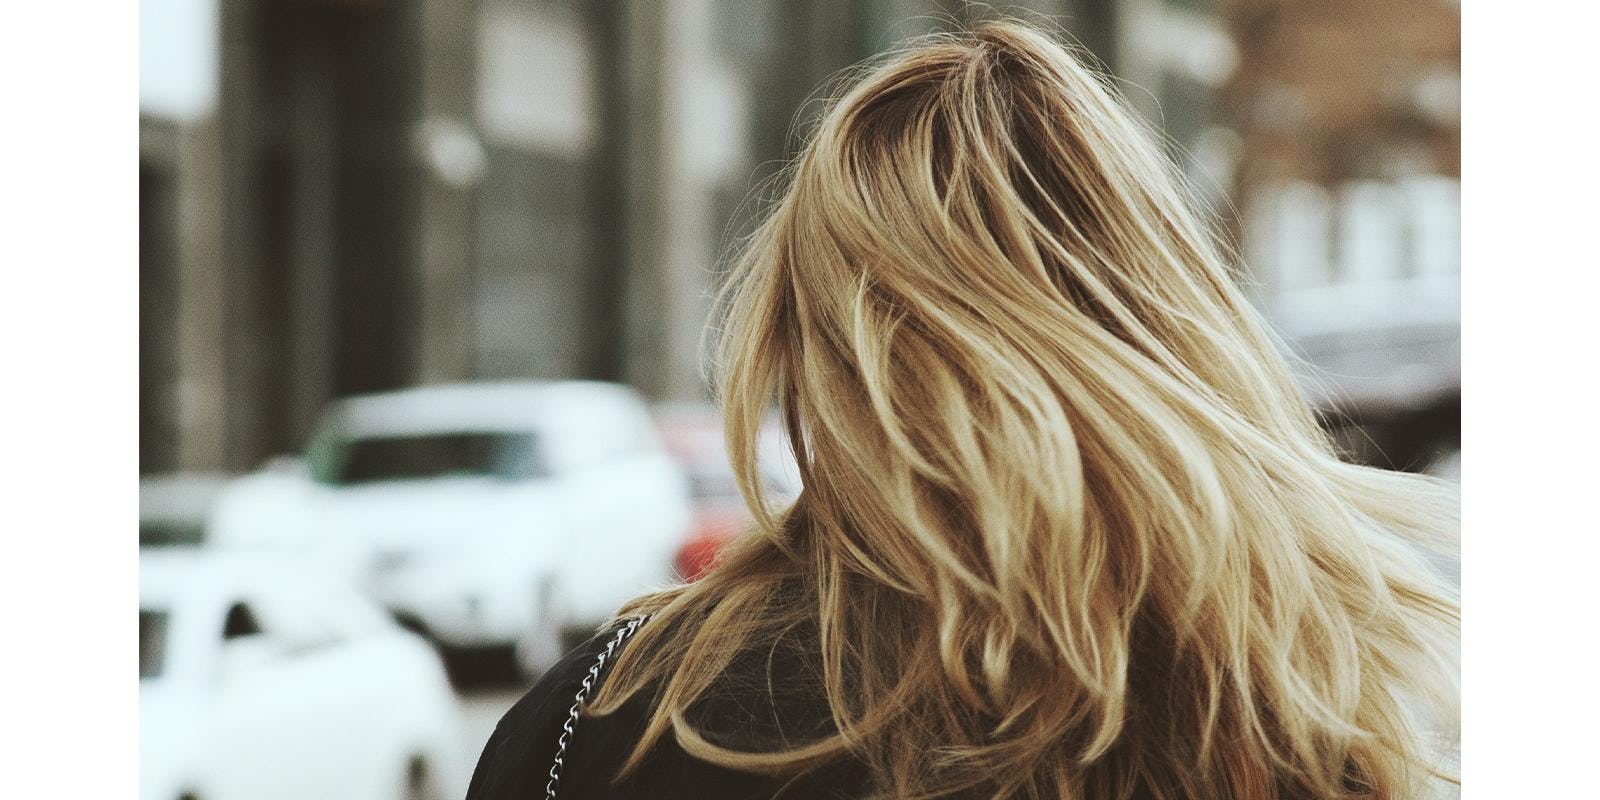 10. "Cool Blonde Hair Maintenance Tips and Tricks" - wide 5